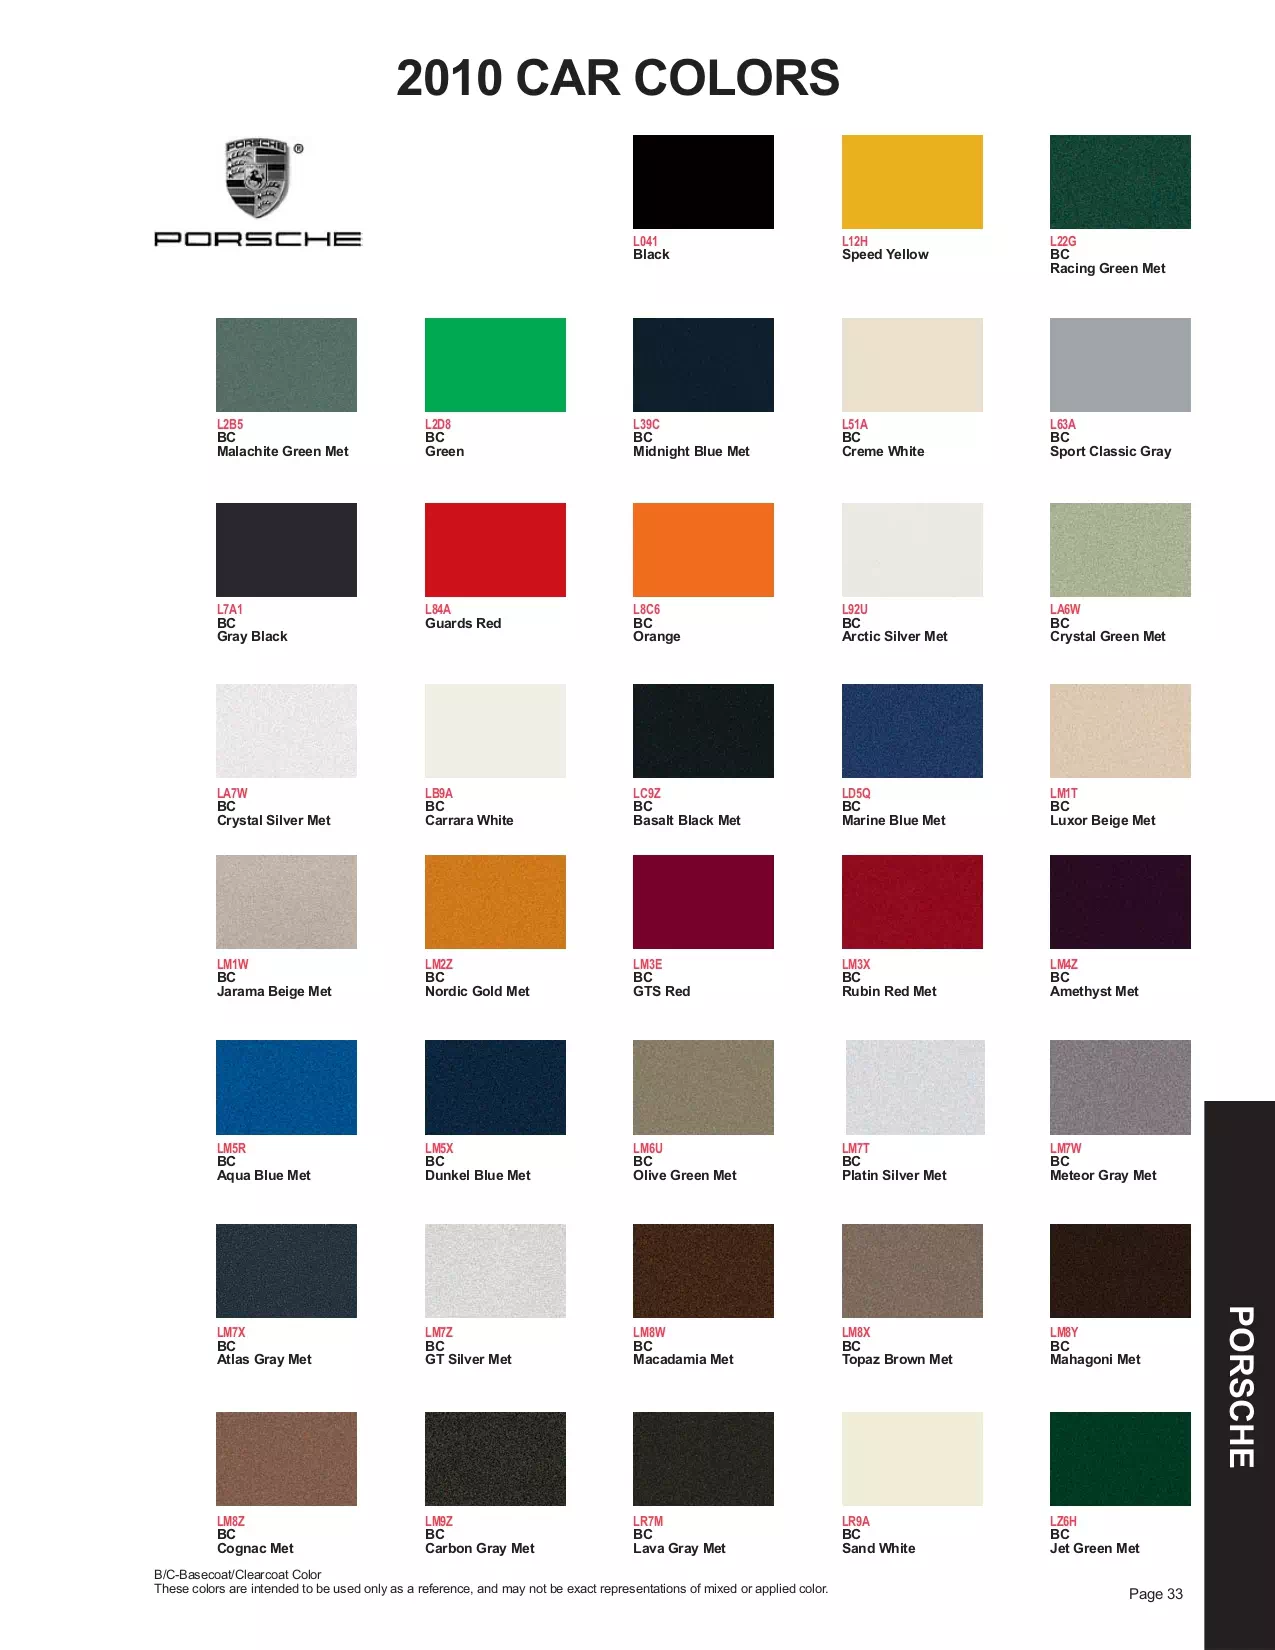 EXTERIOR COLOR CODES AND EXAMPLES USED ON PORSCHE IN 2010